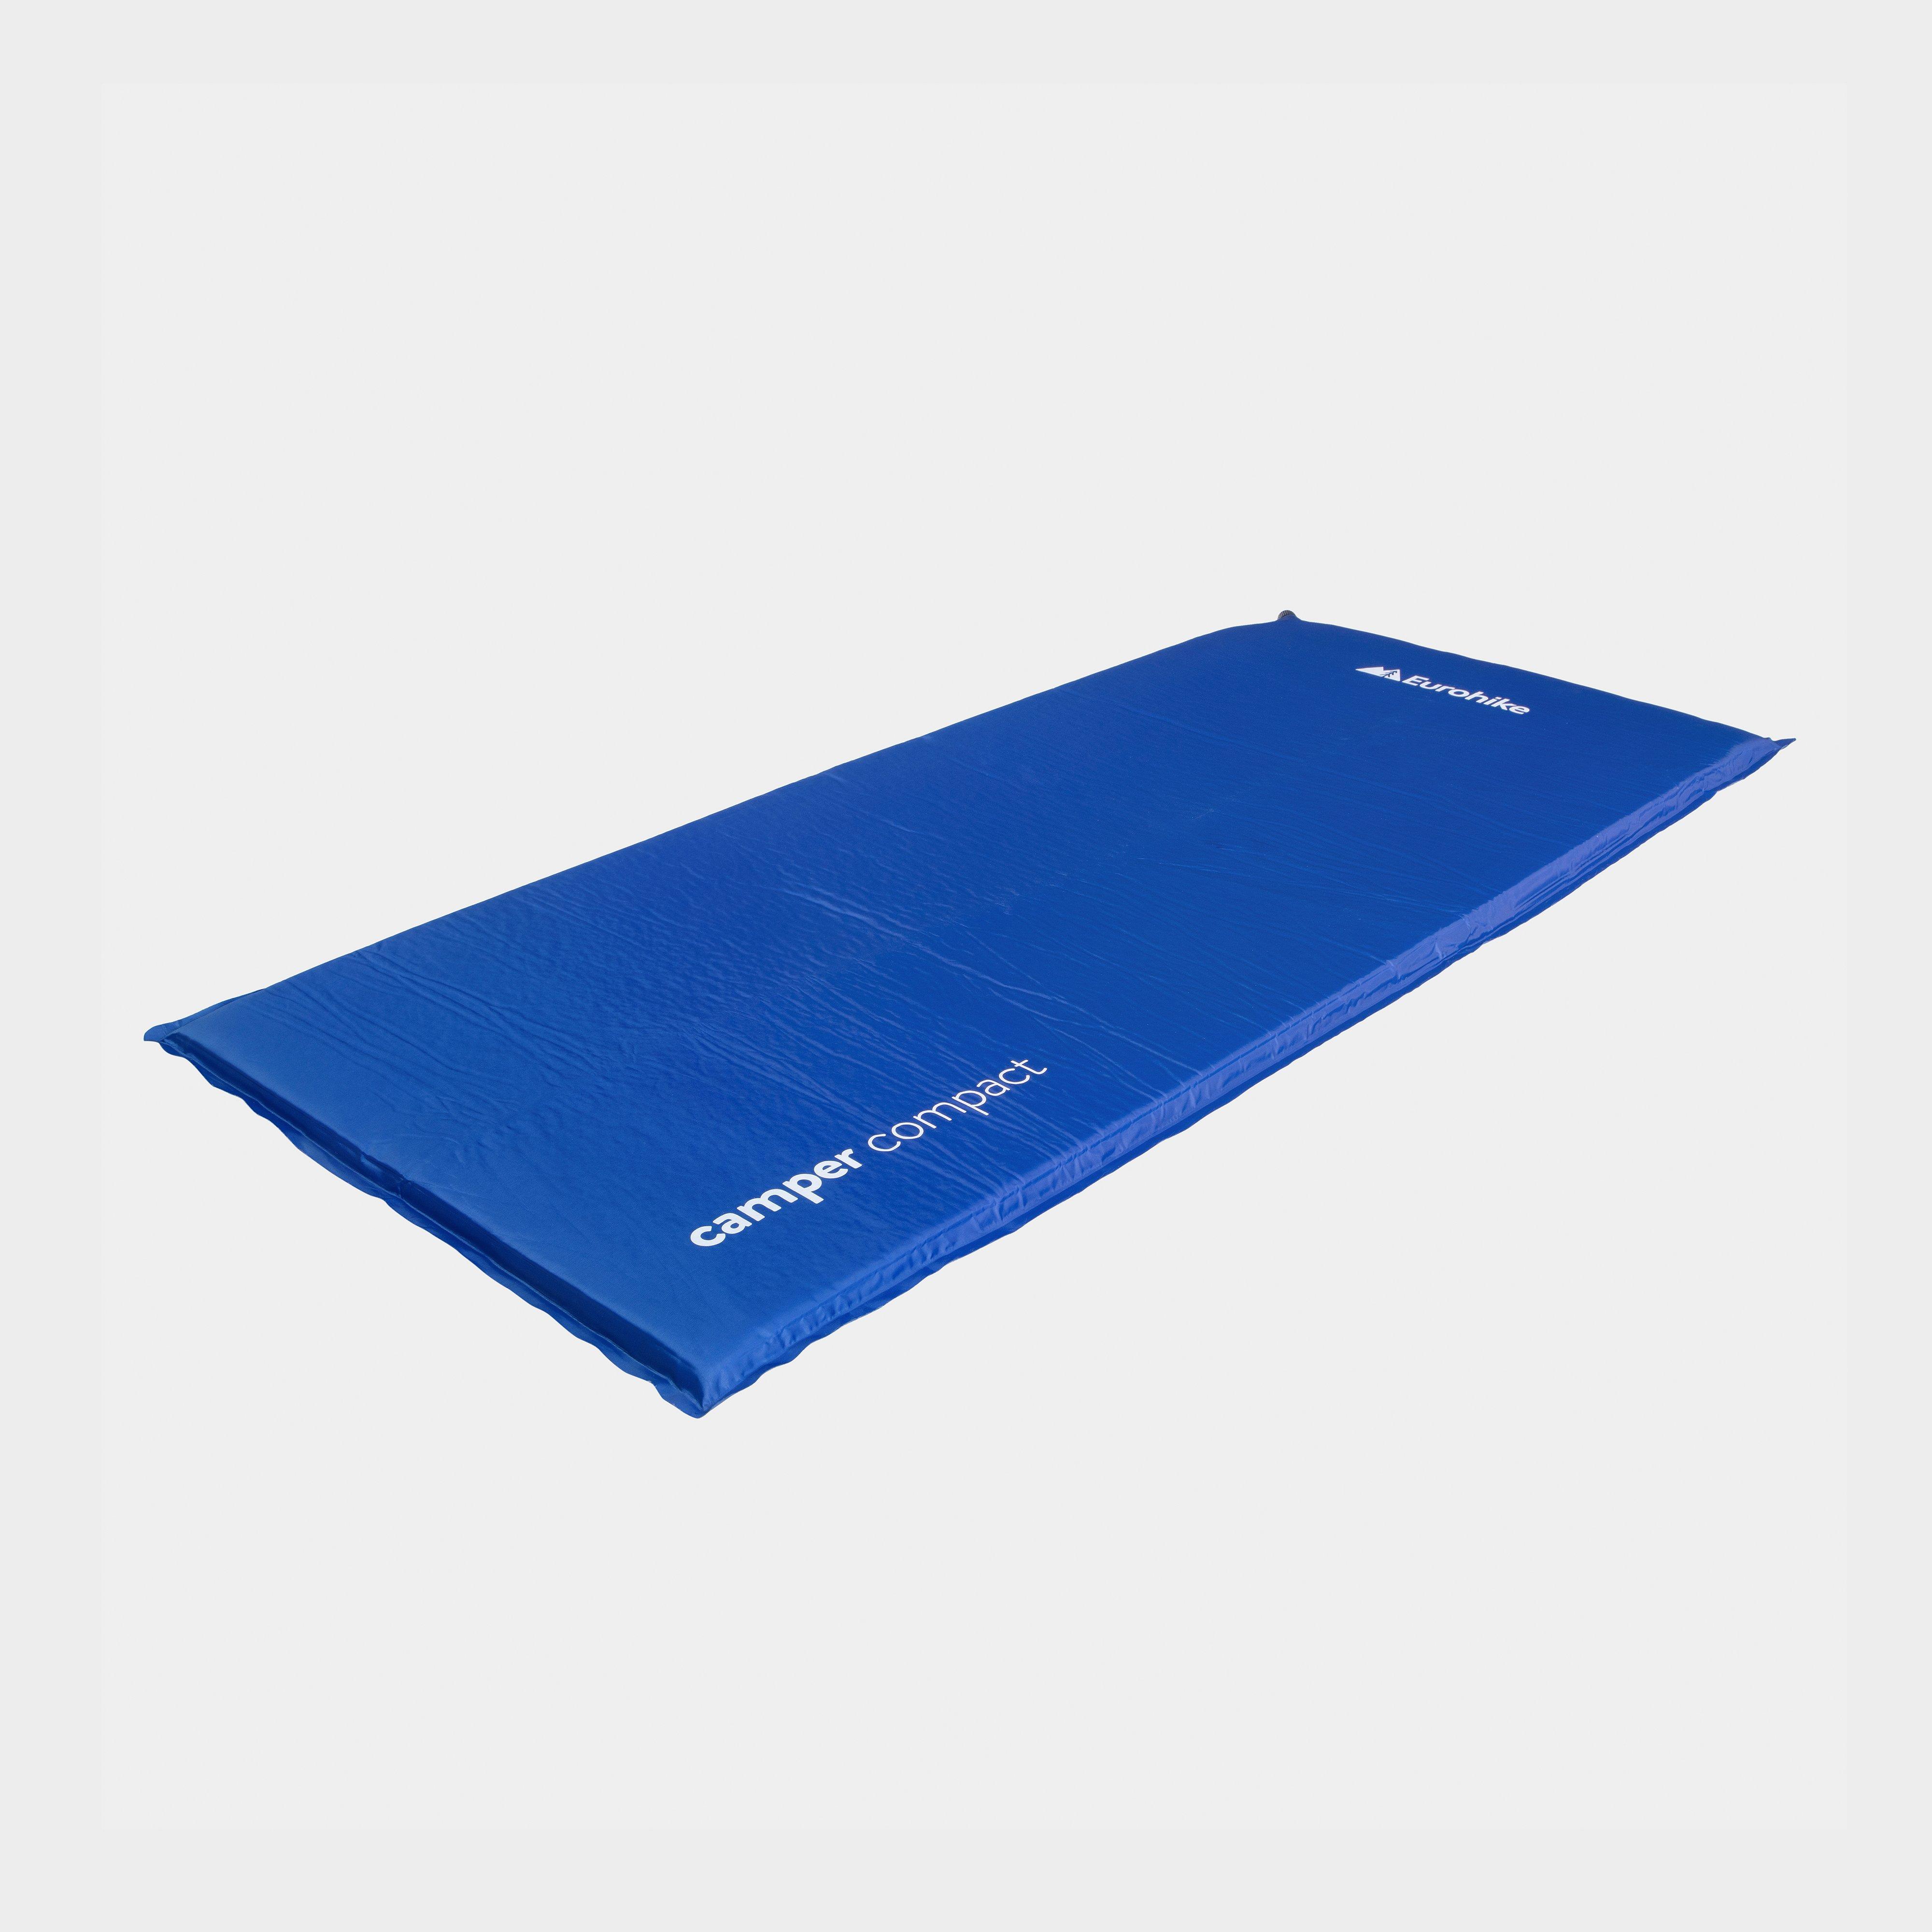 Eurohike Camper Compact Self Inflating Mat Review